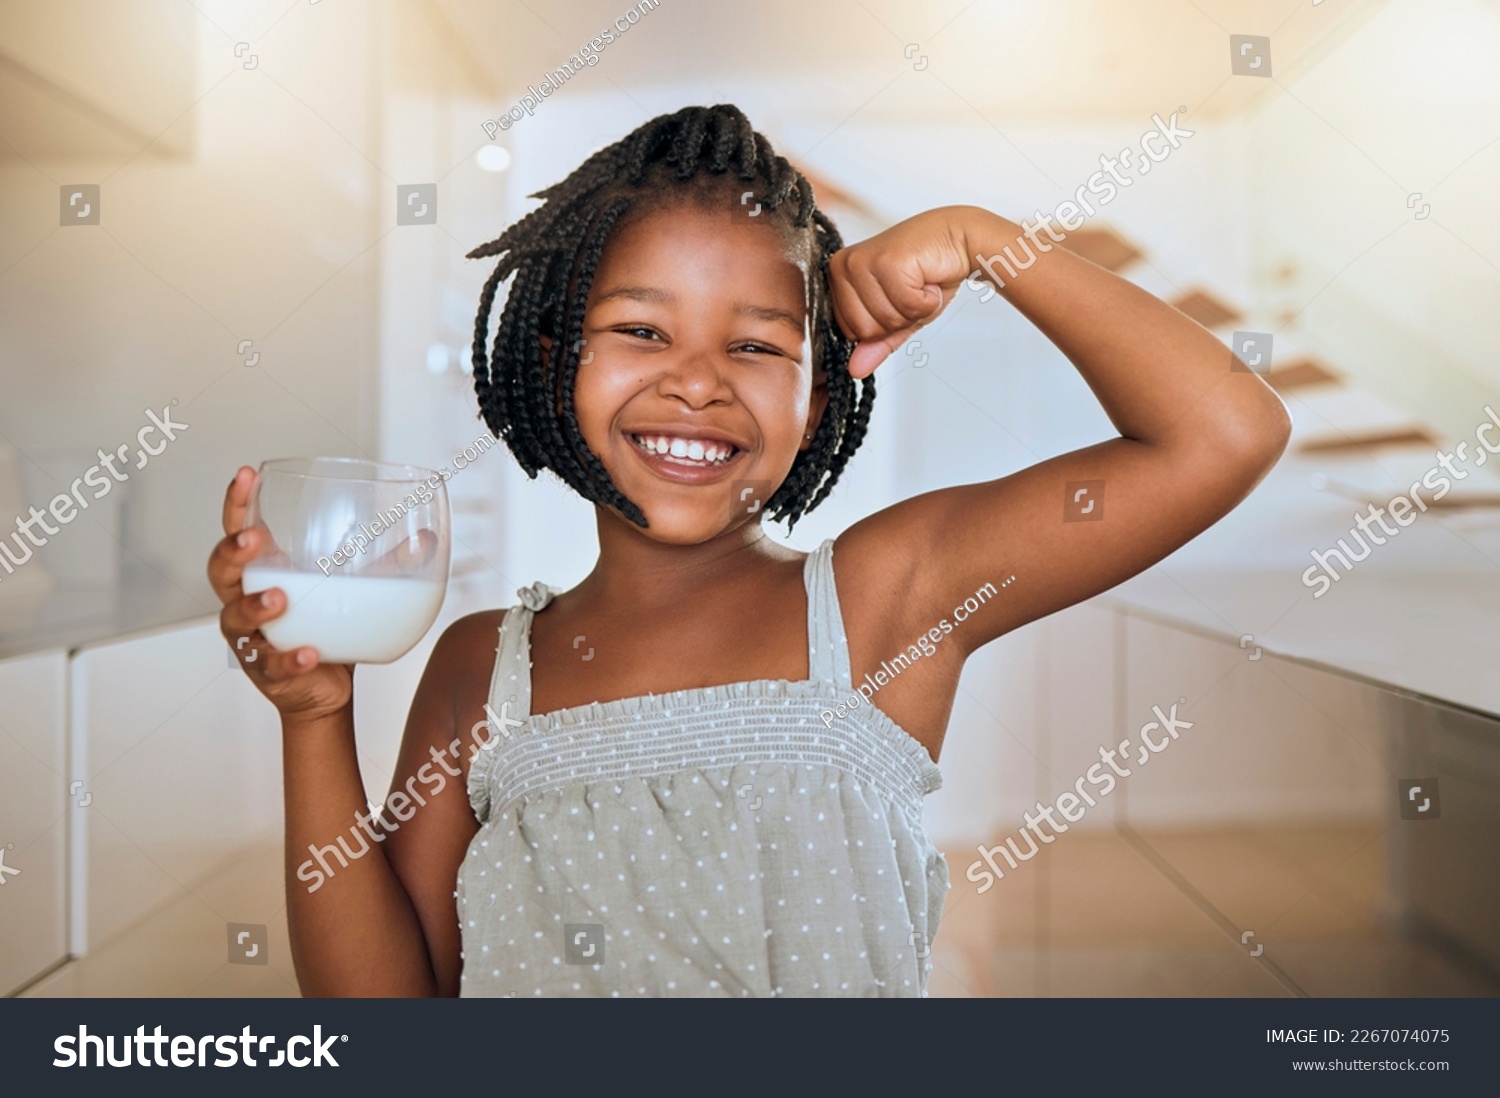 Milk, portrait and African girl with muscle from healthy drink for energy, growth and nutrition in the kitchen. Happy, smile and child flexing muscles from calcium in a glass and care for health #2267074075